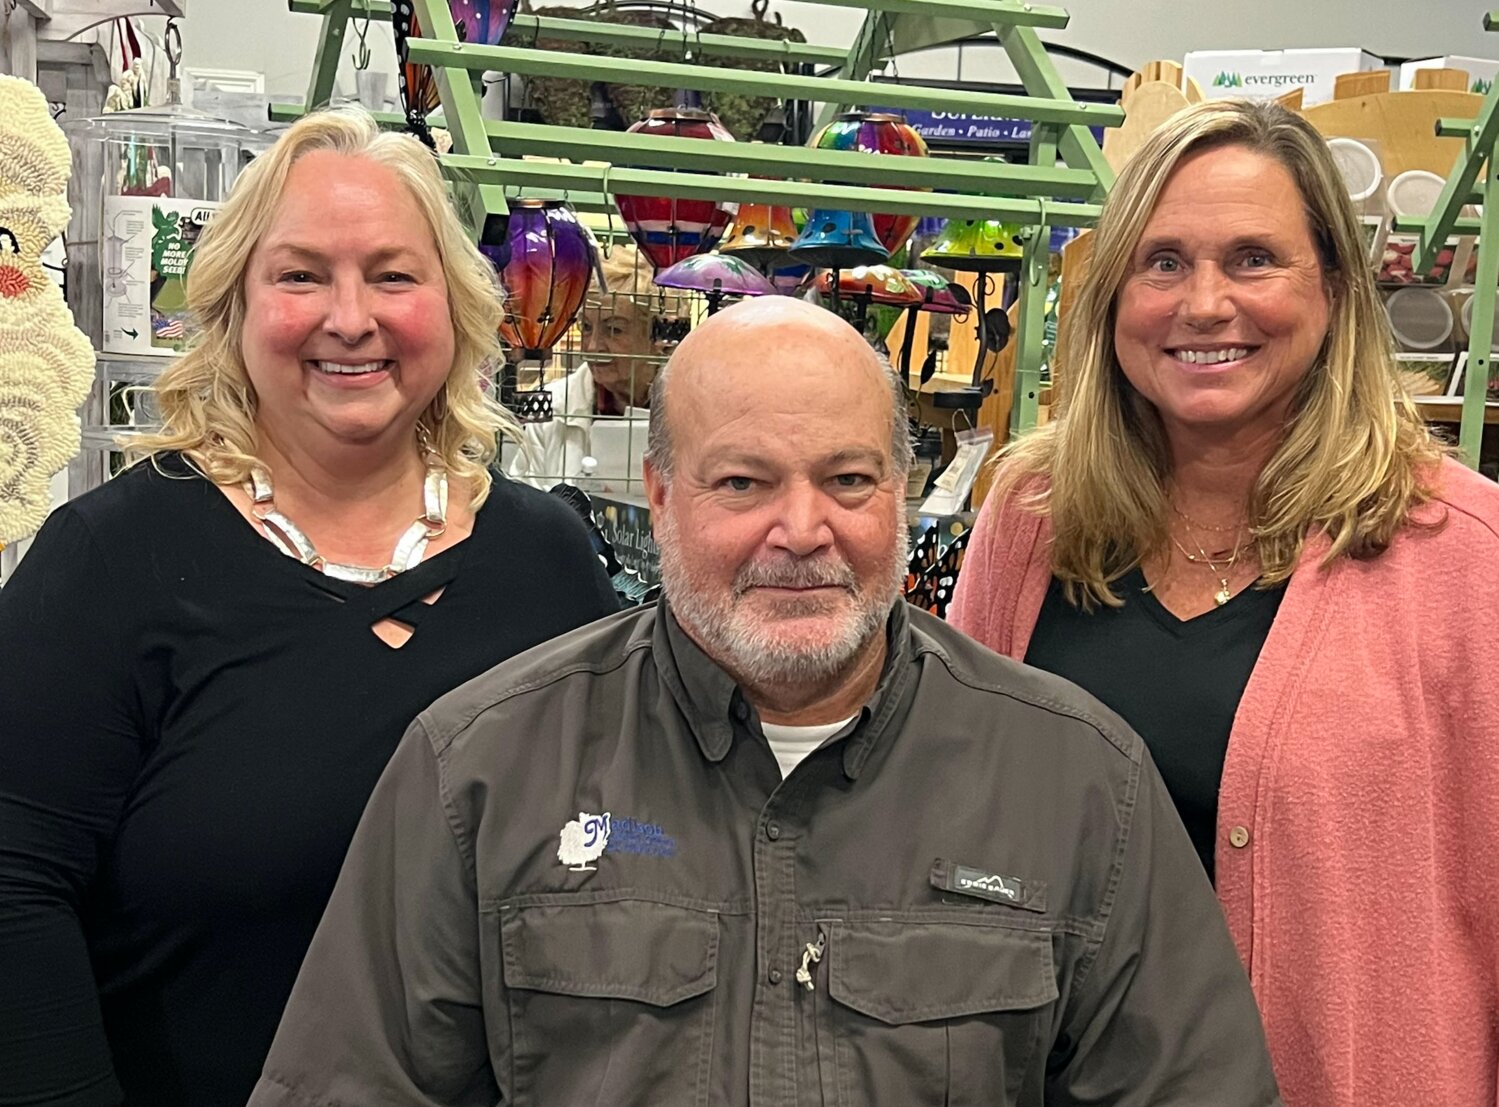 Pictured are Paula Howard, president; Nick and Nancy Thompson, owners of Madison Garden Center.